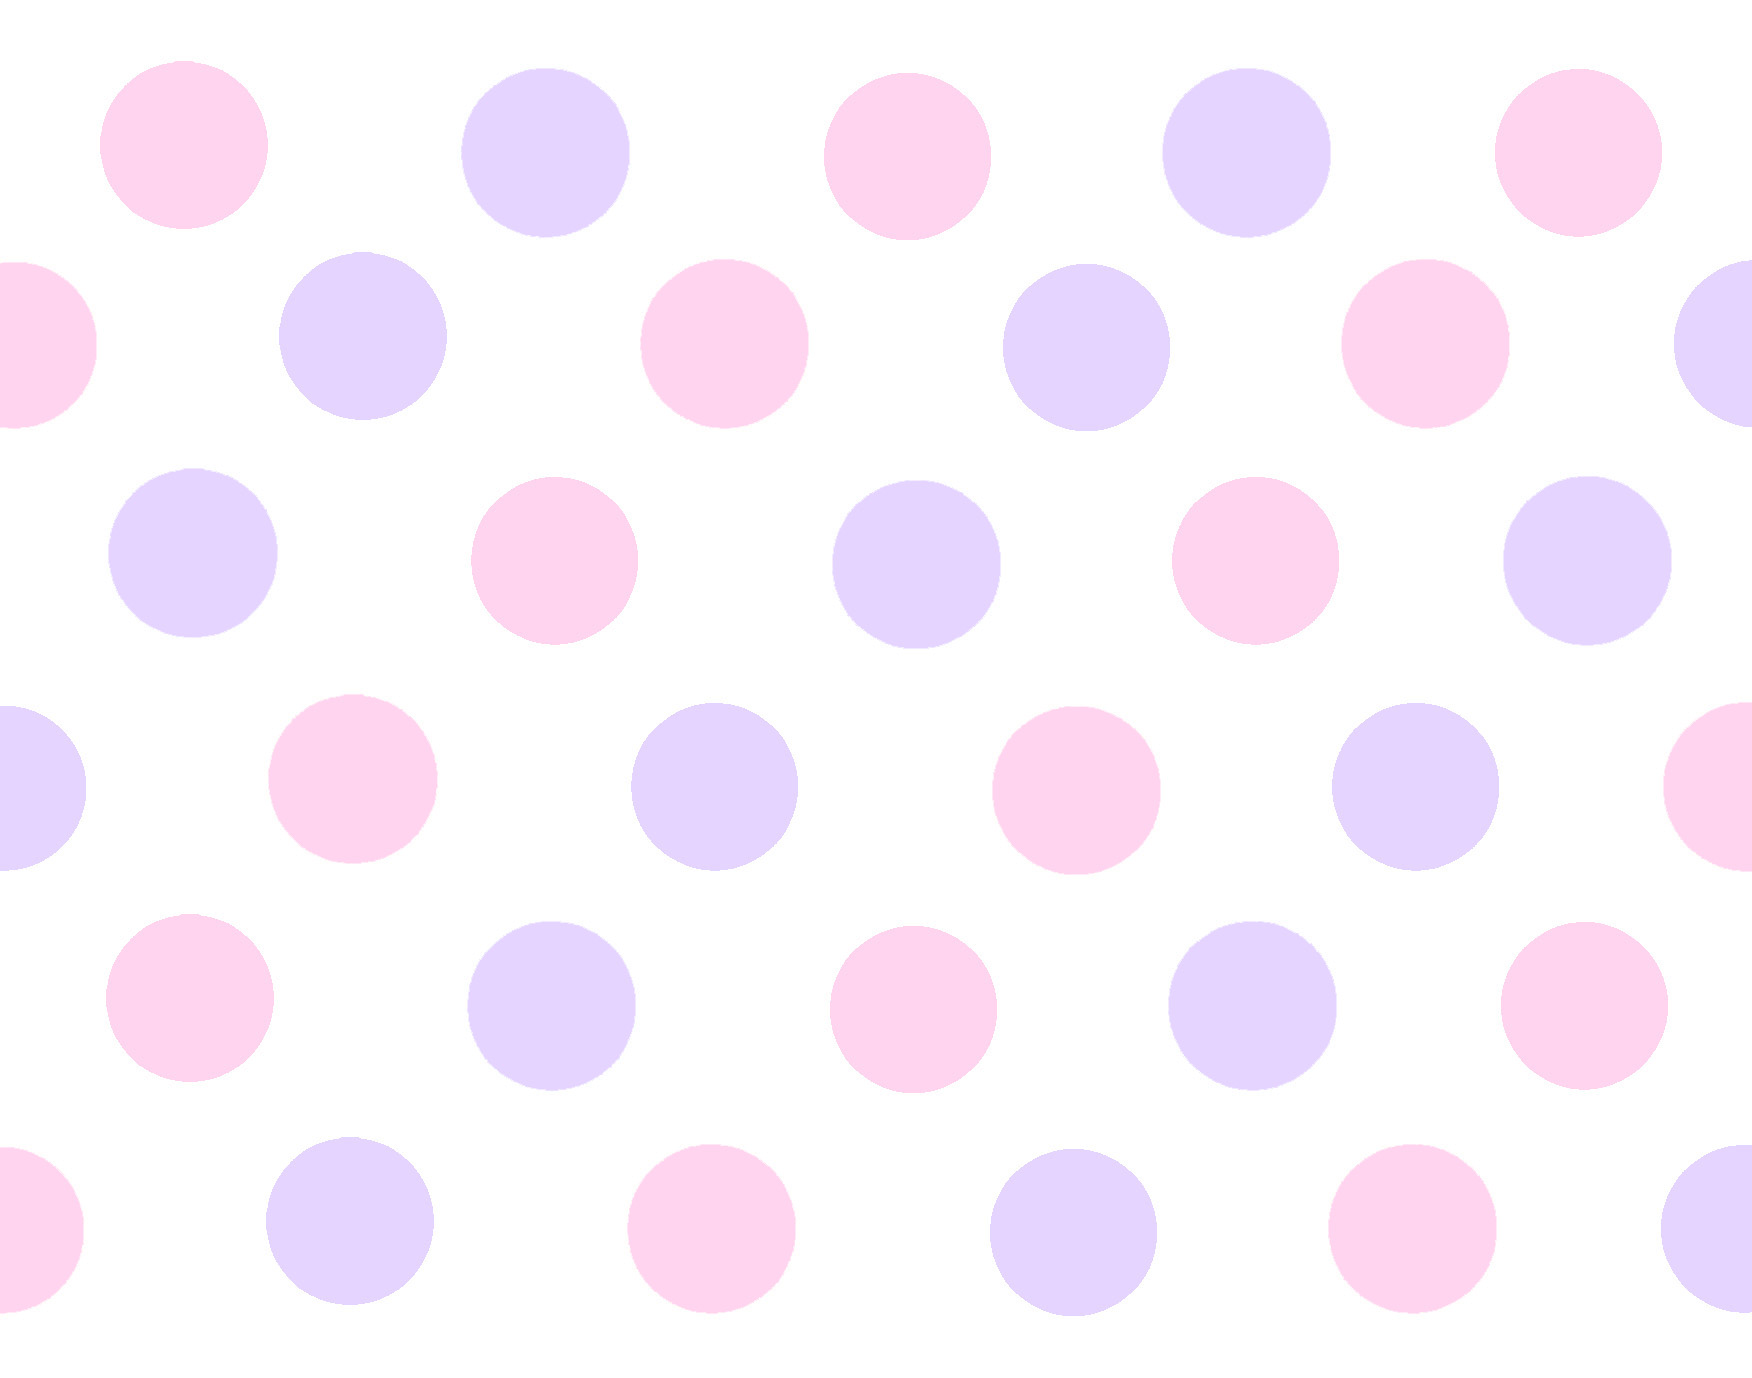 Polka Dot Iphone Wallpaper Images  Free Photos PNG Stickers Wallpapers   Backgrounds  rawpixel